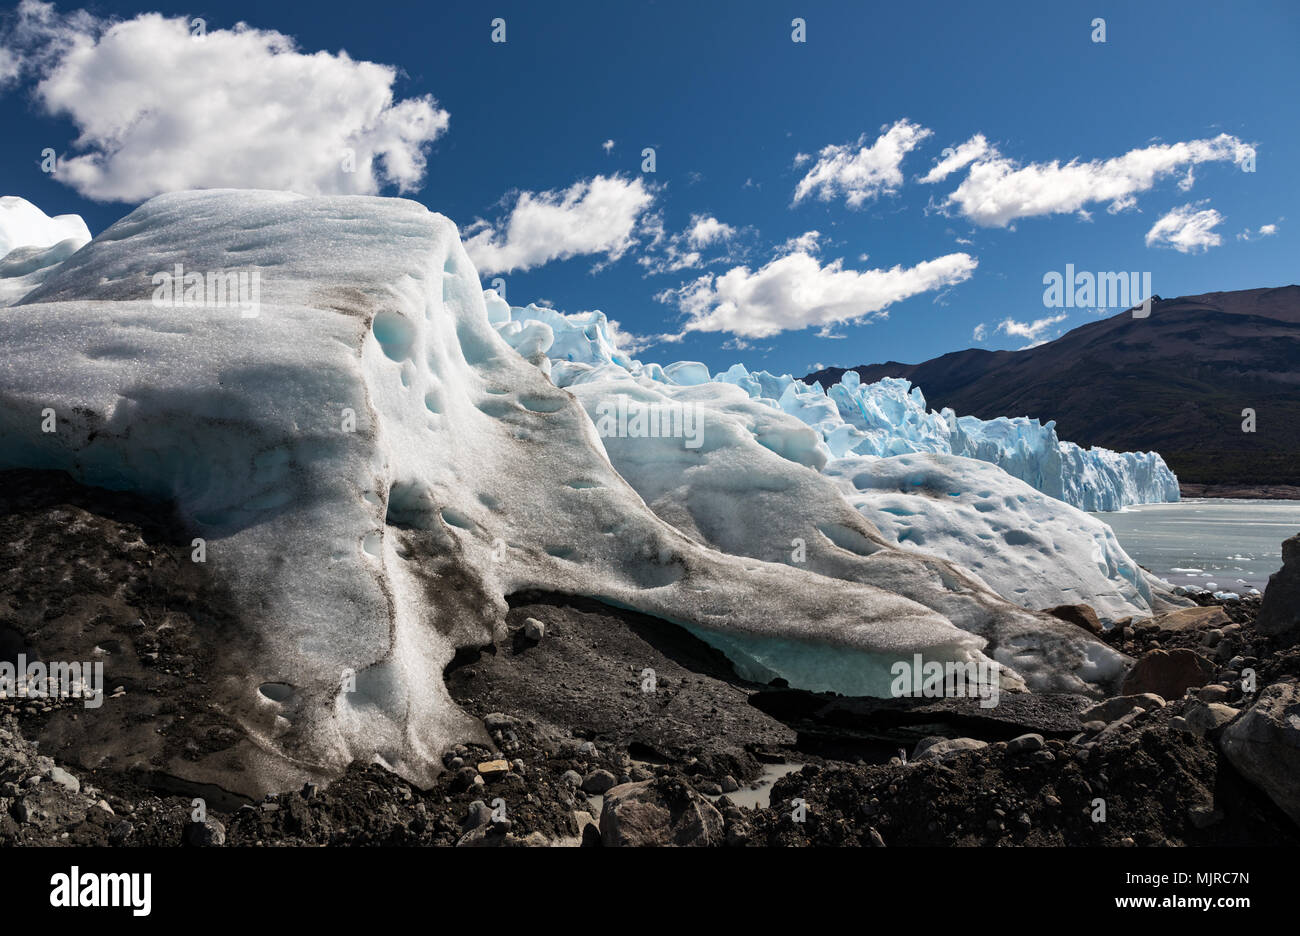 El Calyfate, Argentina - December 14, 2016: A man in sunglasses and hat looks out over the Perito Moreno Glacier at the start of a hike on the ice Stock Photo